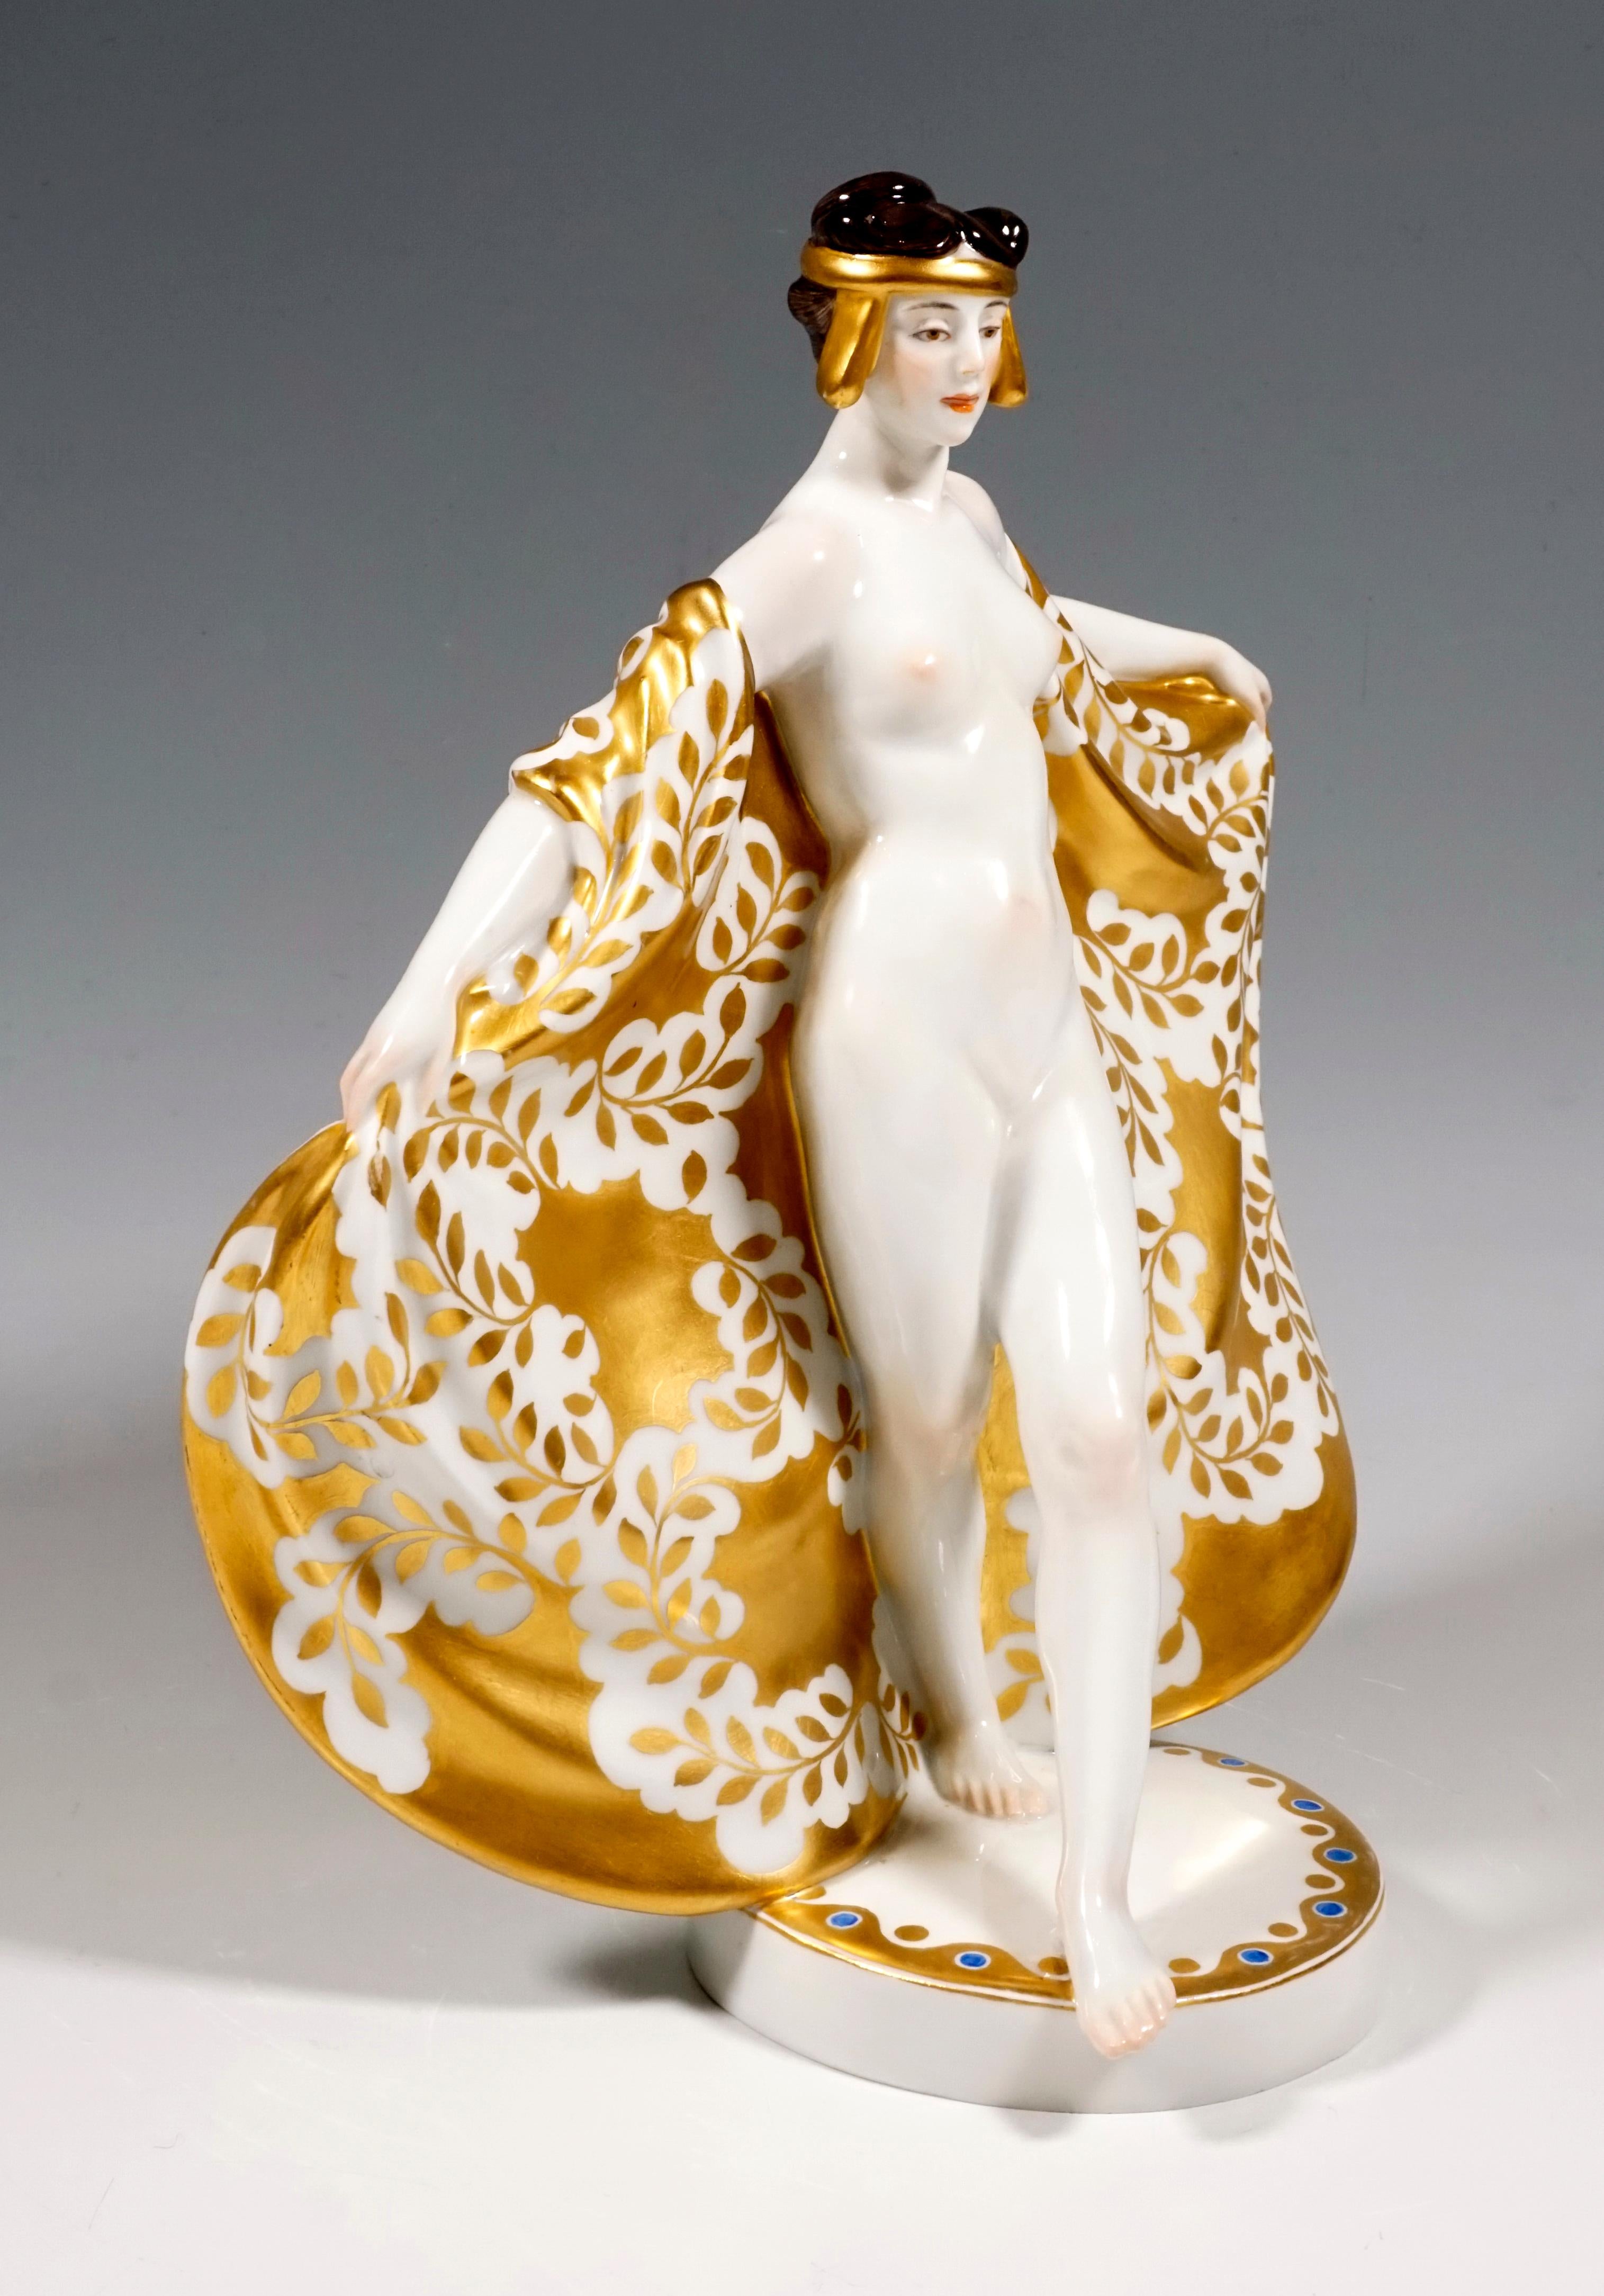 Extremely decorative, sculptural representation of the dancer Loie Fuller, undressed, just wearing a large, softly falling, floor-length cloth with a golden laurel branch decoration around her shoulders. She wears a golden, oriental-looking